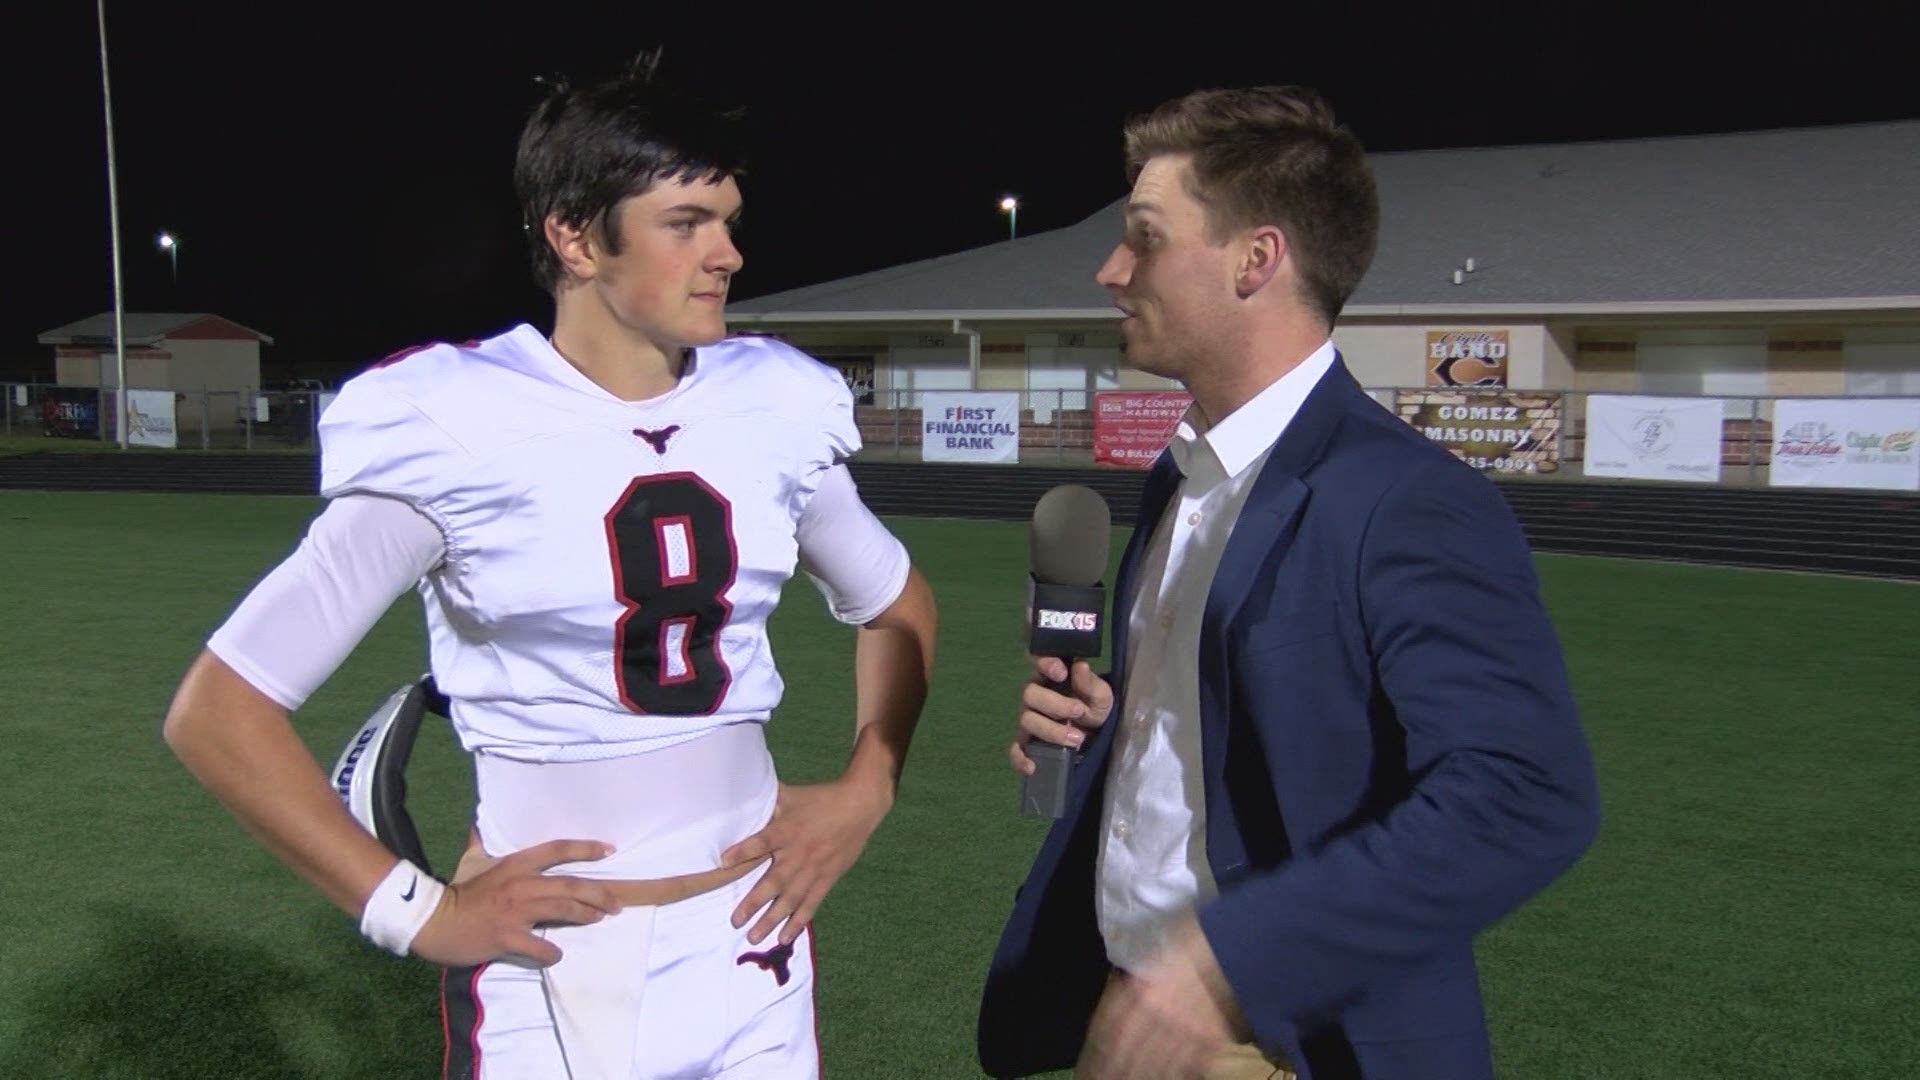 The Eastland Mavericks trailed by a touchdown coming out of the half, but rattled off 21 unanswered points to take the win over Clyde. Our Mitchel Summers caught up with QB Behren Morton after the game.